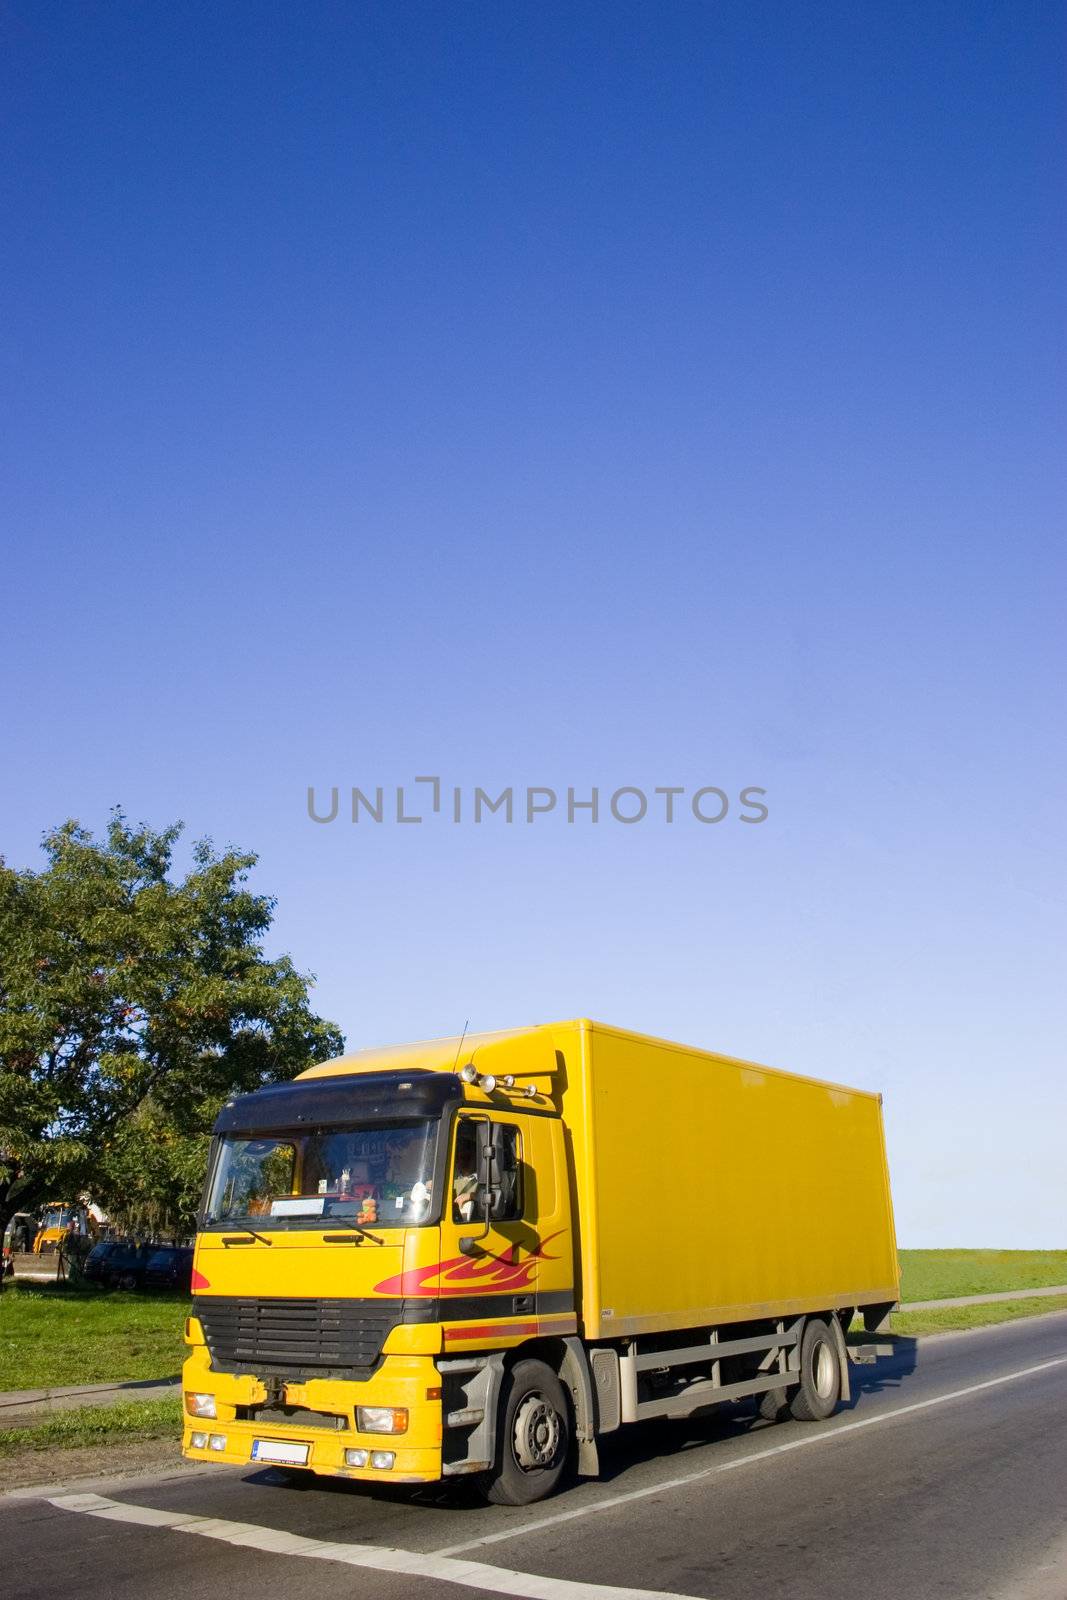 Yellow truck on asphalt road. Large blue sky with place for copy text.